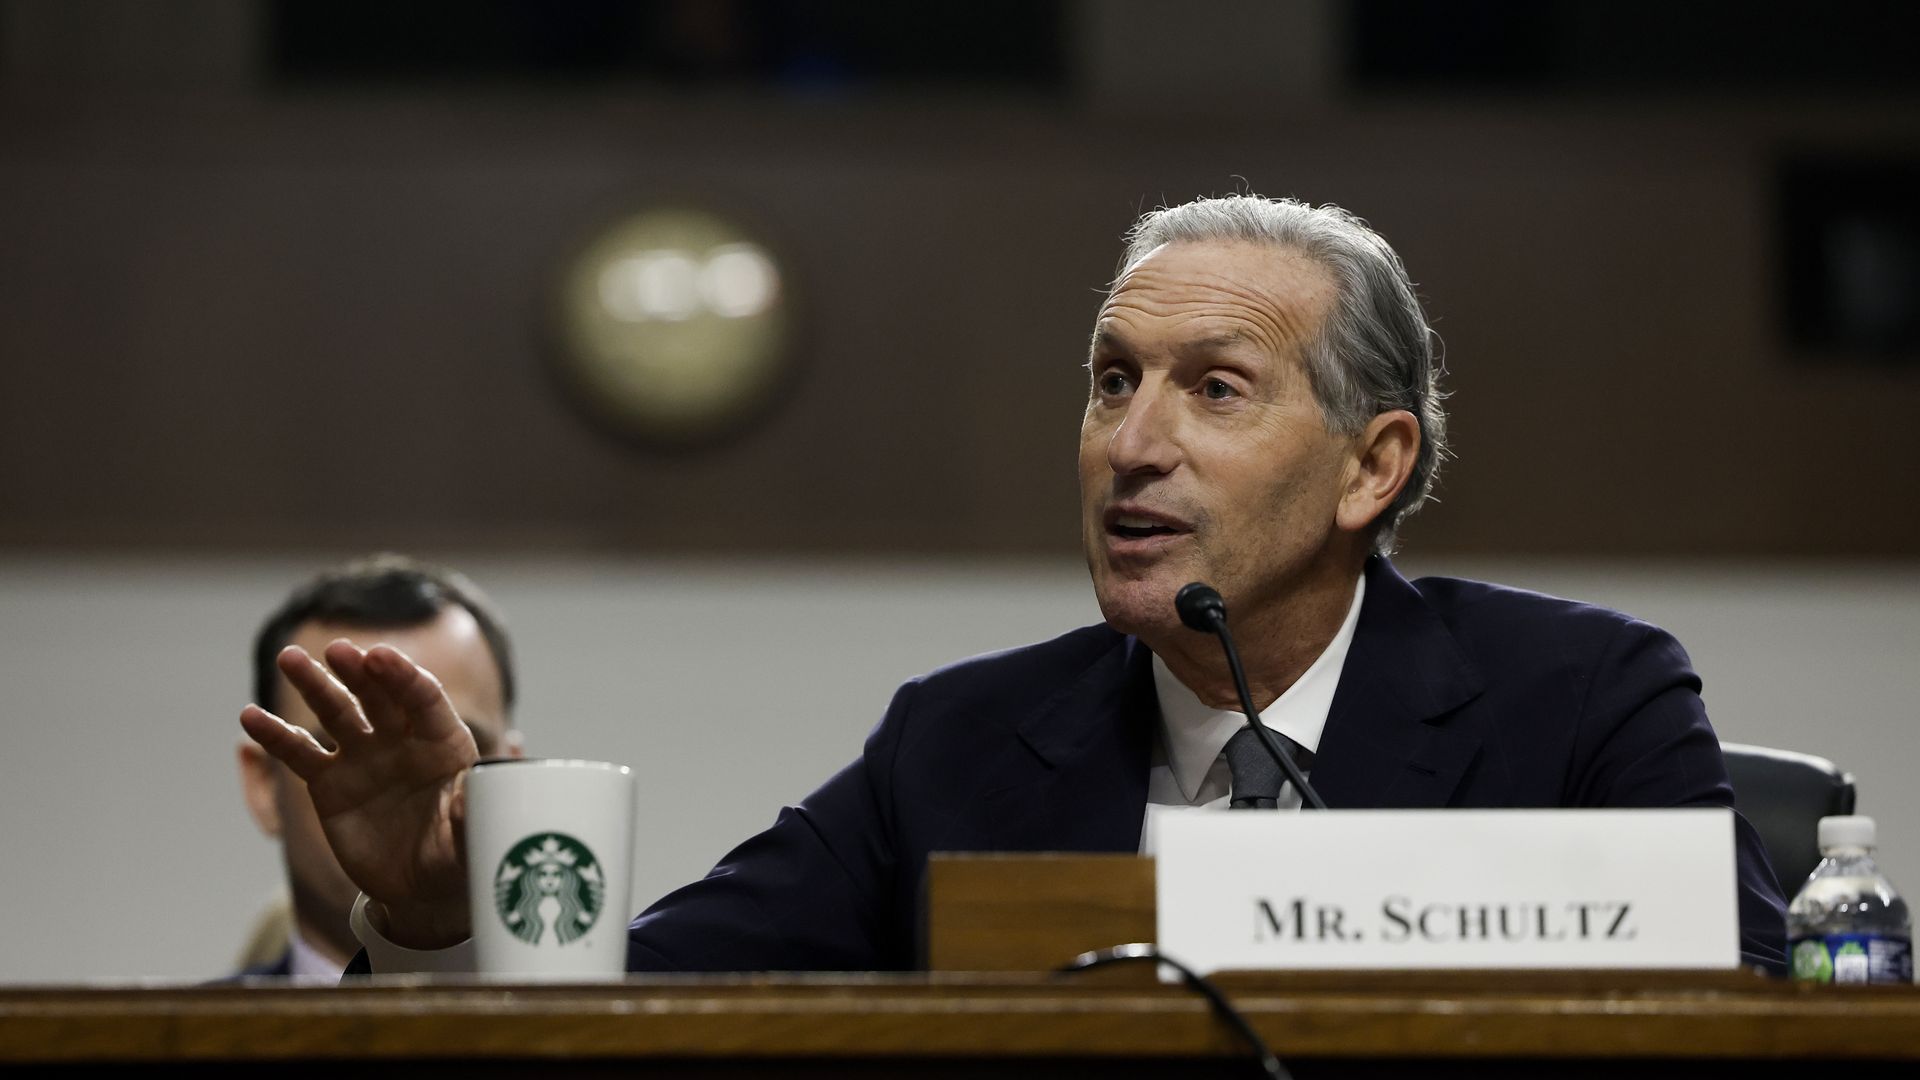  Former Starbucks CEO Howard Schultz testifies before the Senate Health, Education, Labor, and Pensions Committee in the Dirksen Senate Office Building on Capitol Hill on March 29, 2023 in Washington, DC. 